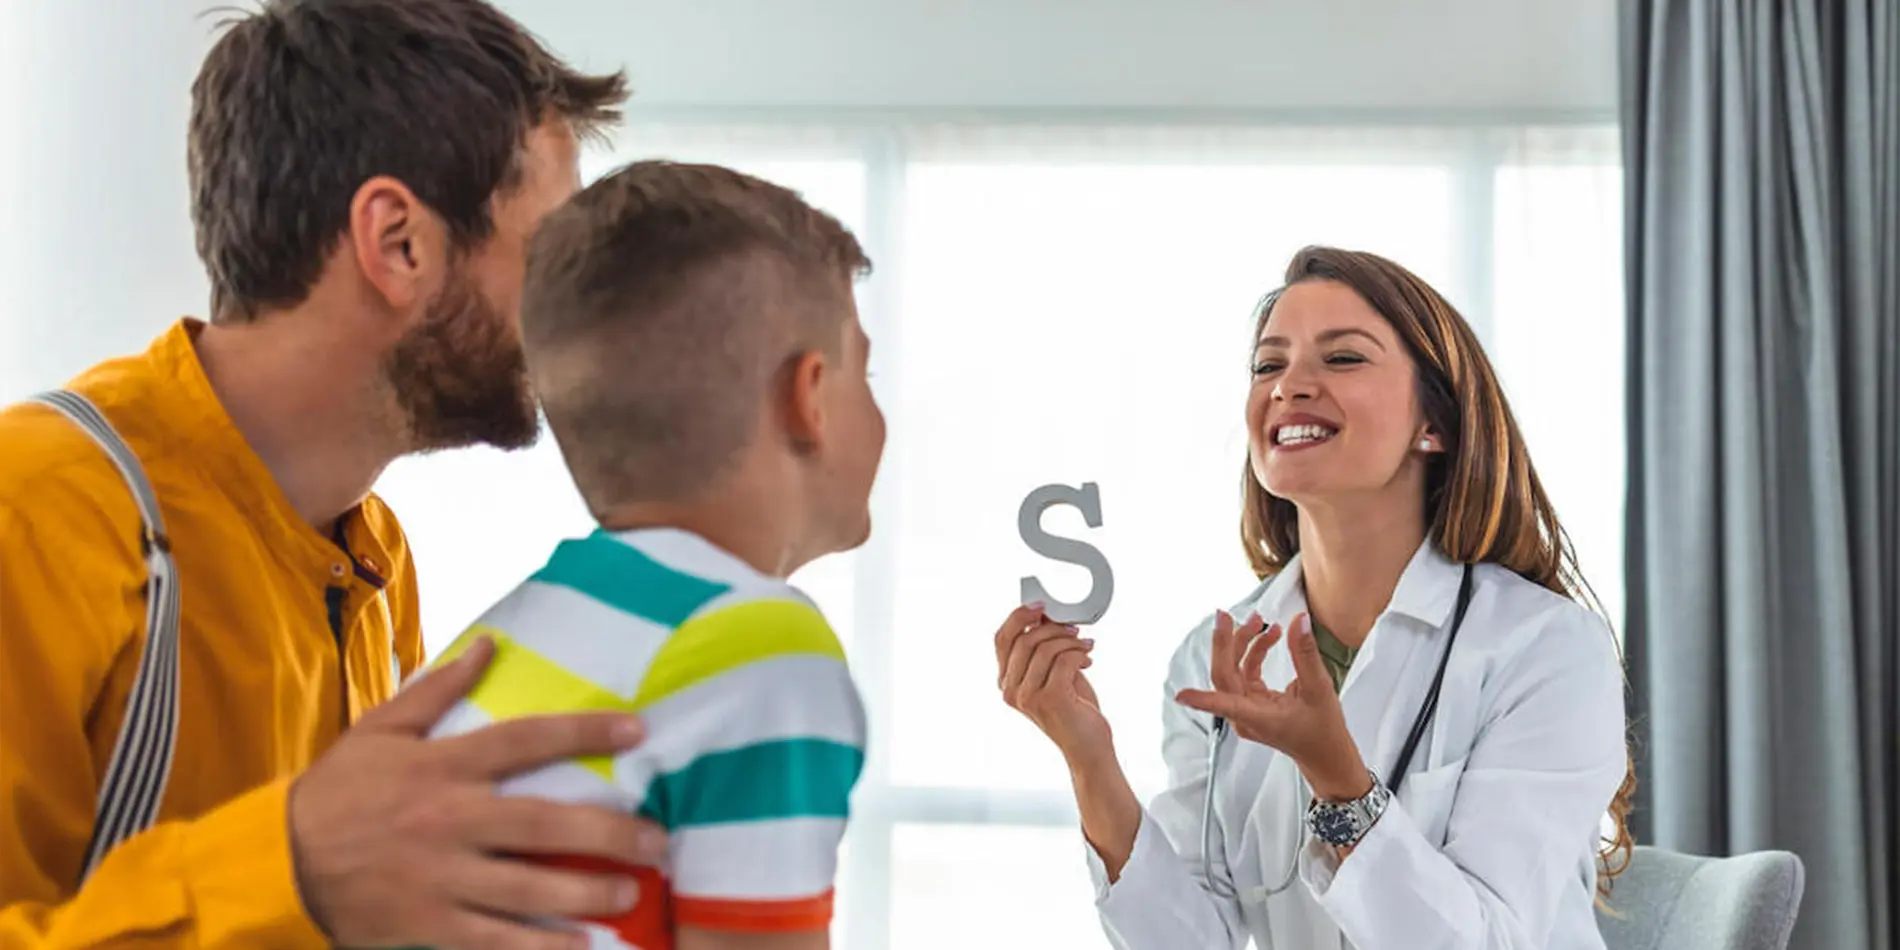 A speech language pathologist is pronouncing the letter "S" while also holding up a wooden "S" to a young person and their guardian.